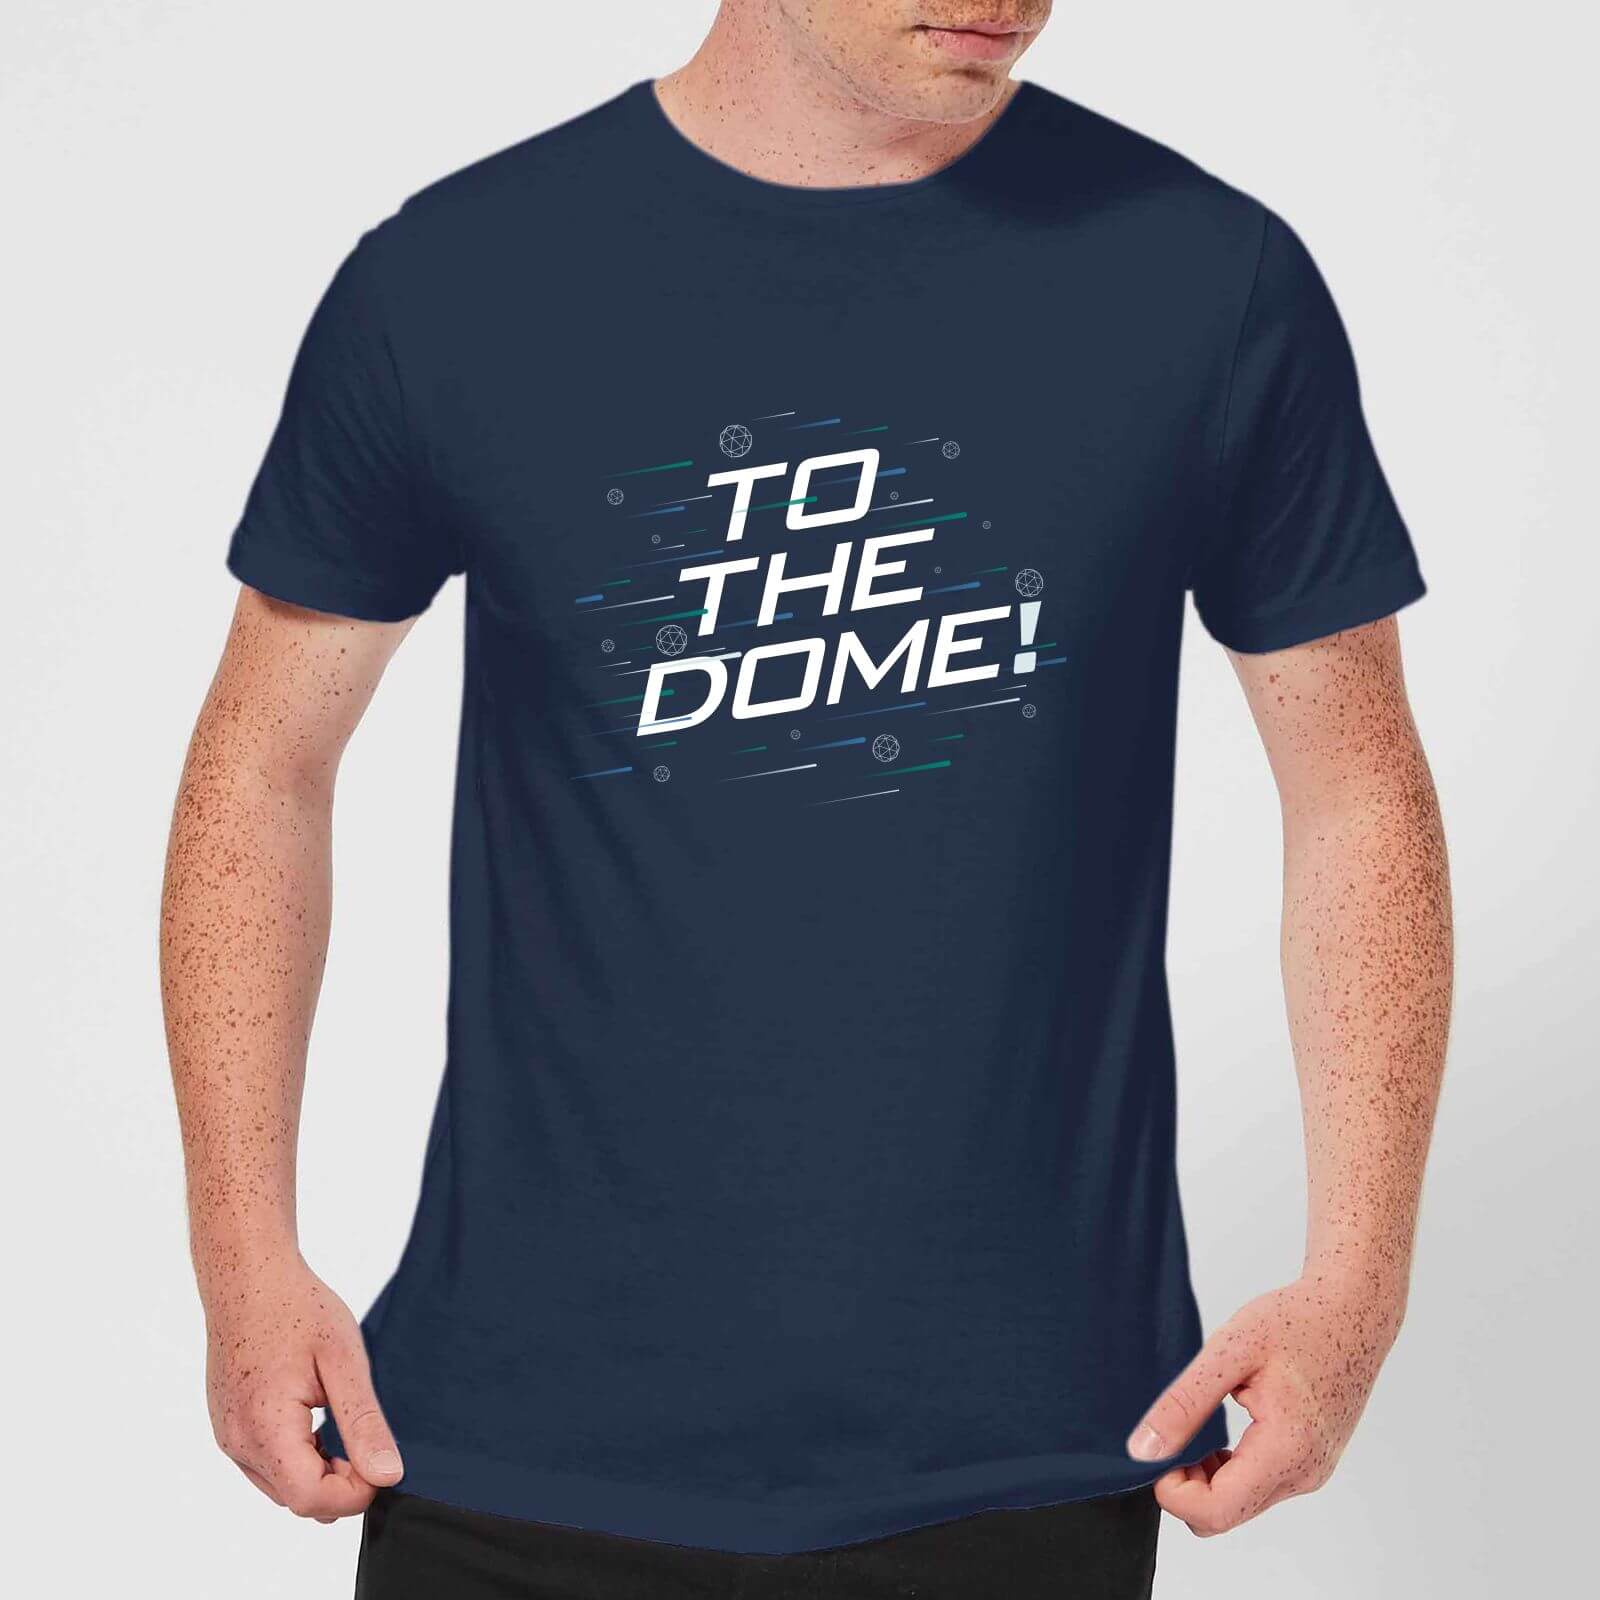 Crystal Maze To The Dome! Men's T-Shirt - Navy - S - Navy